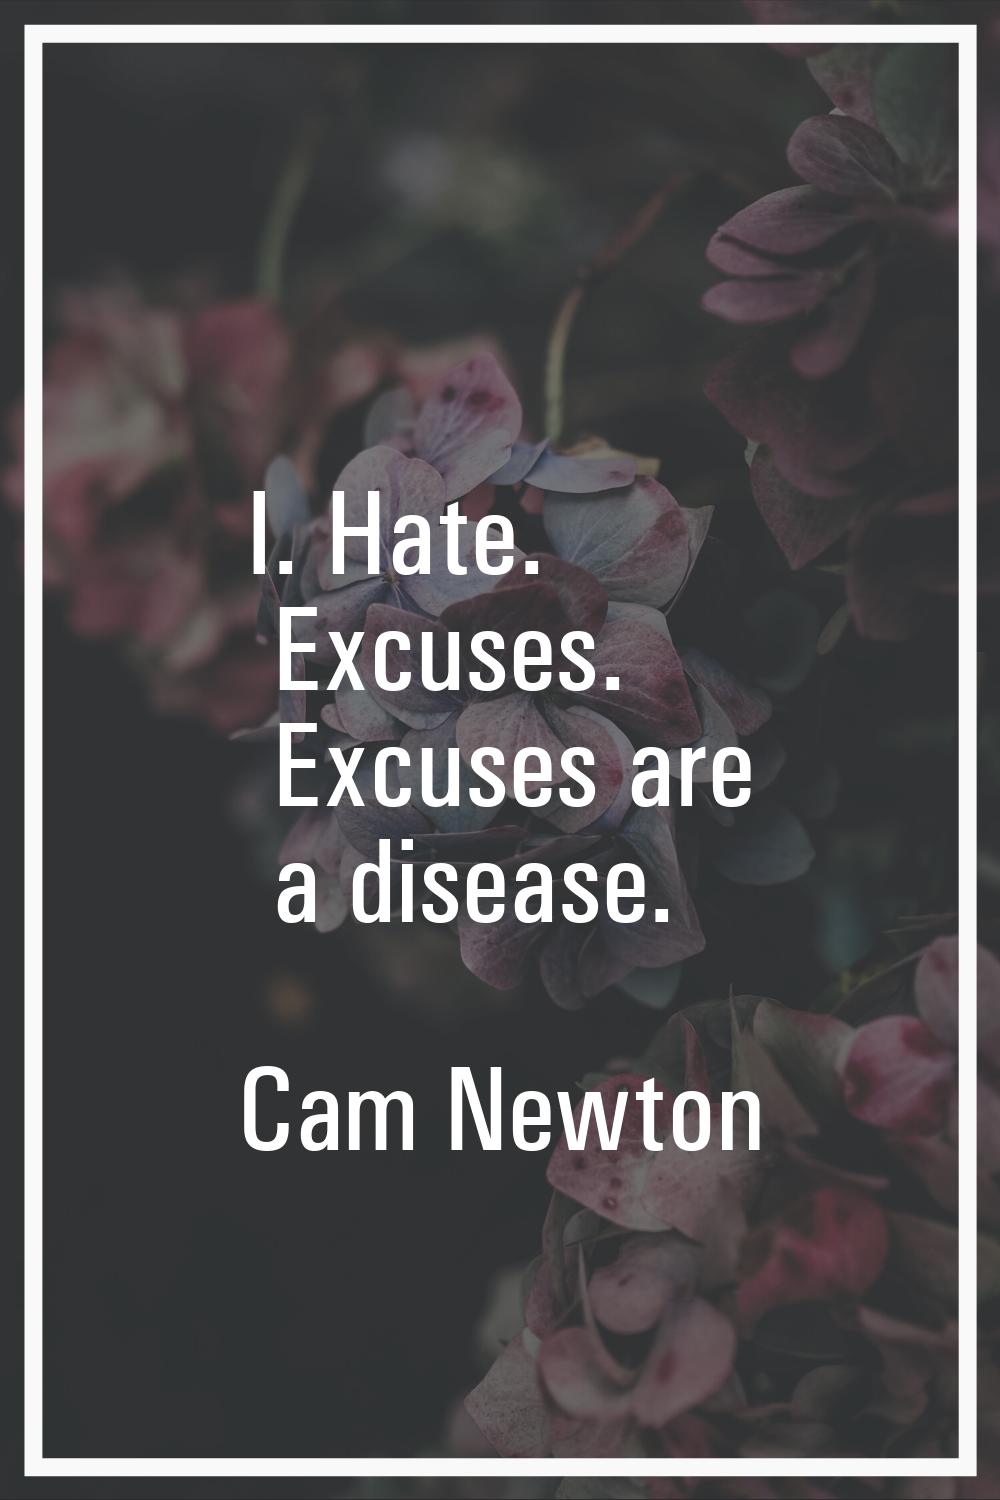 I. Hate. Excuses. Excuses are a disease.